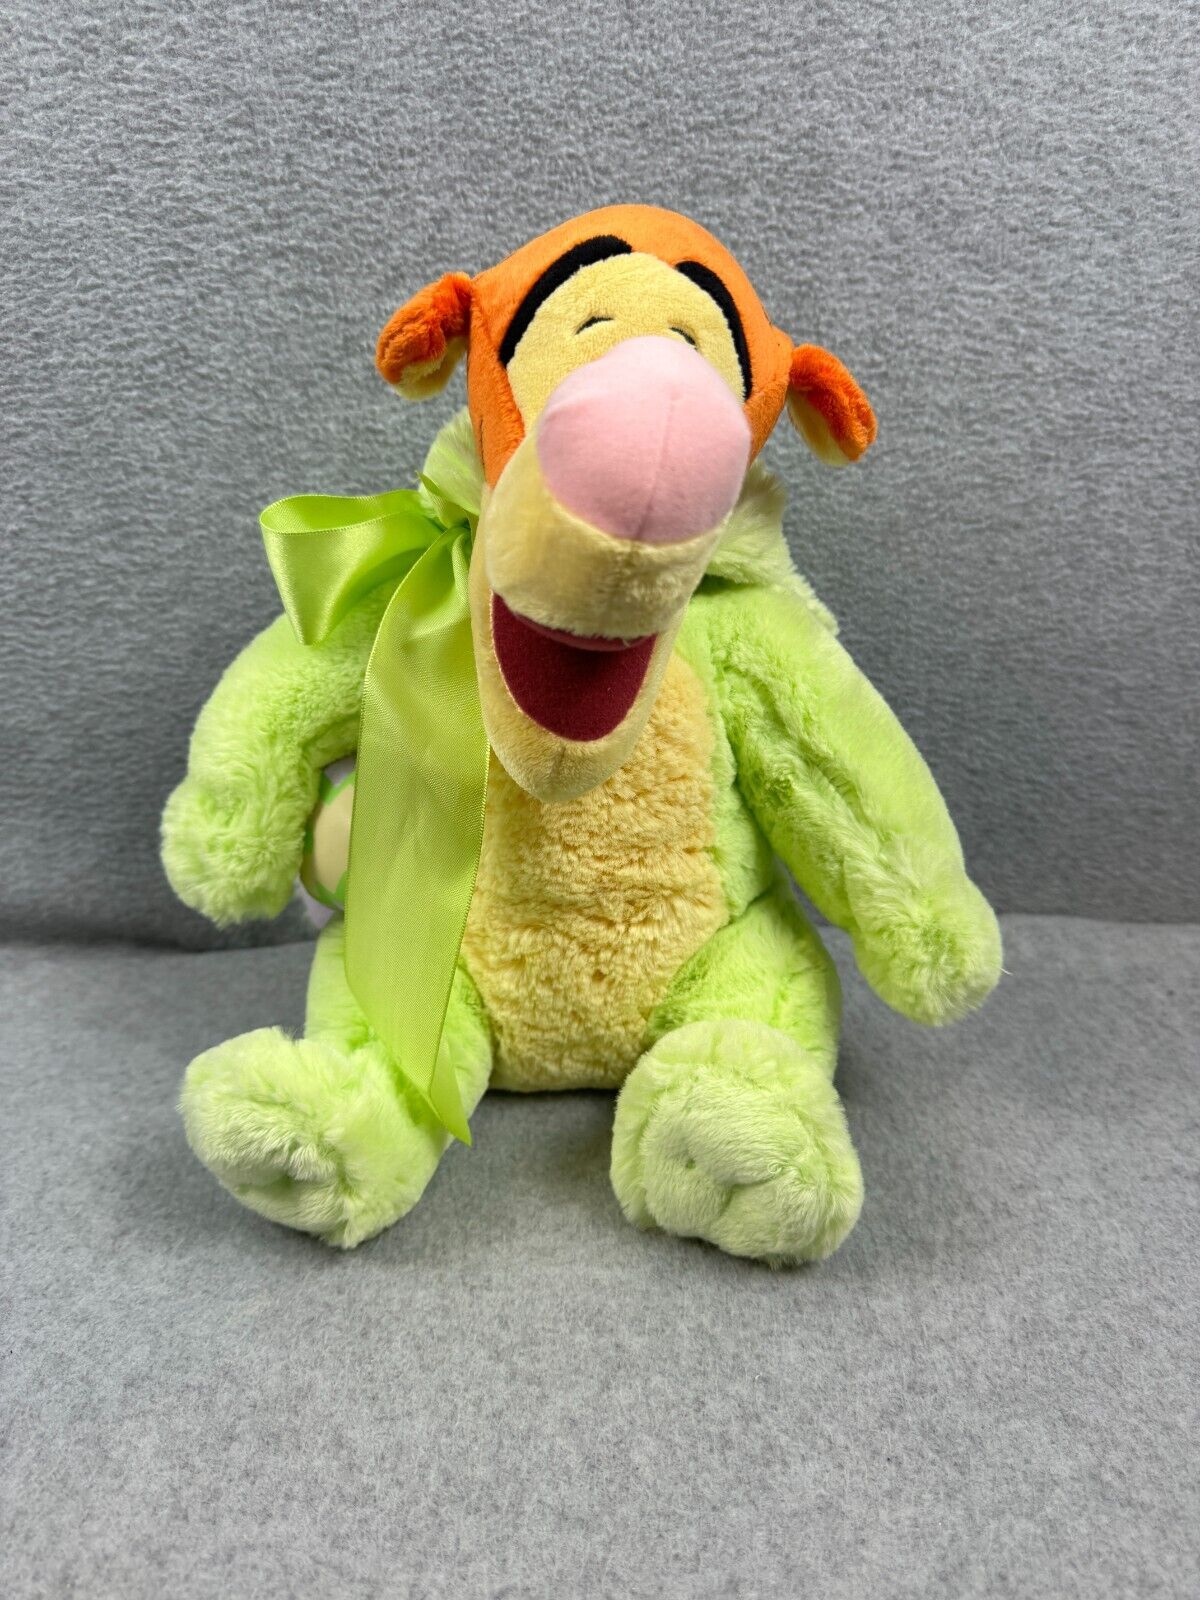 Disney Store Tigger In Bunny Outfit Easter Plush Stuffed Animal Egg 12\